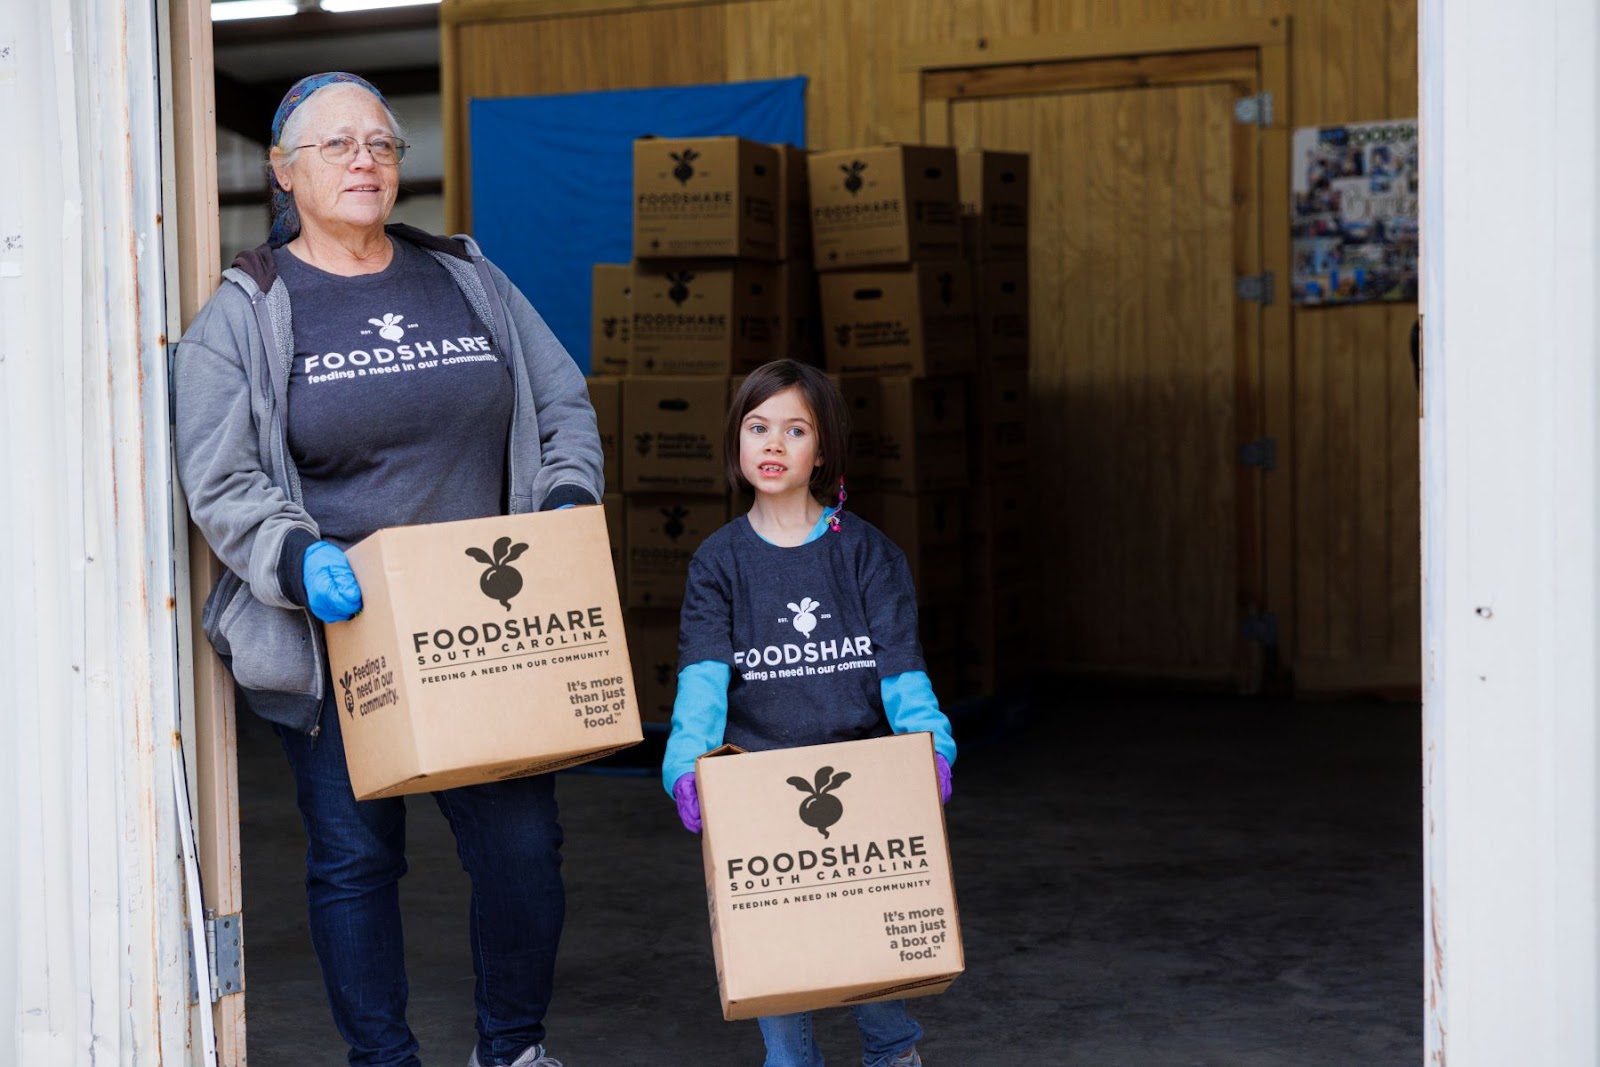 An older white woman and younger white girl stand holing FoodShare South Carolina boxes. The older white woman has a scarf on her head and is wearing a grey FoodShare SC shirt under a gray zip up hoodie. The girl is wearing a grey FoodShare SC shirt over a bright blue long sleeve shirt. They are standing in a large doorway with FoodShare boxes behind them.